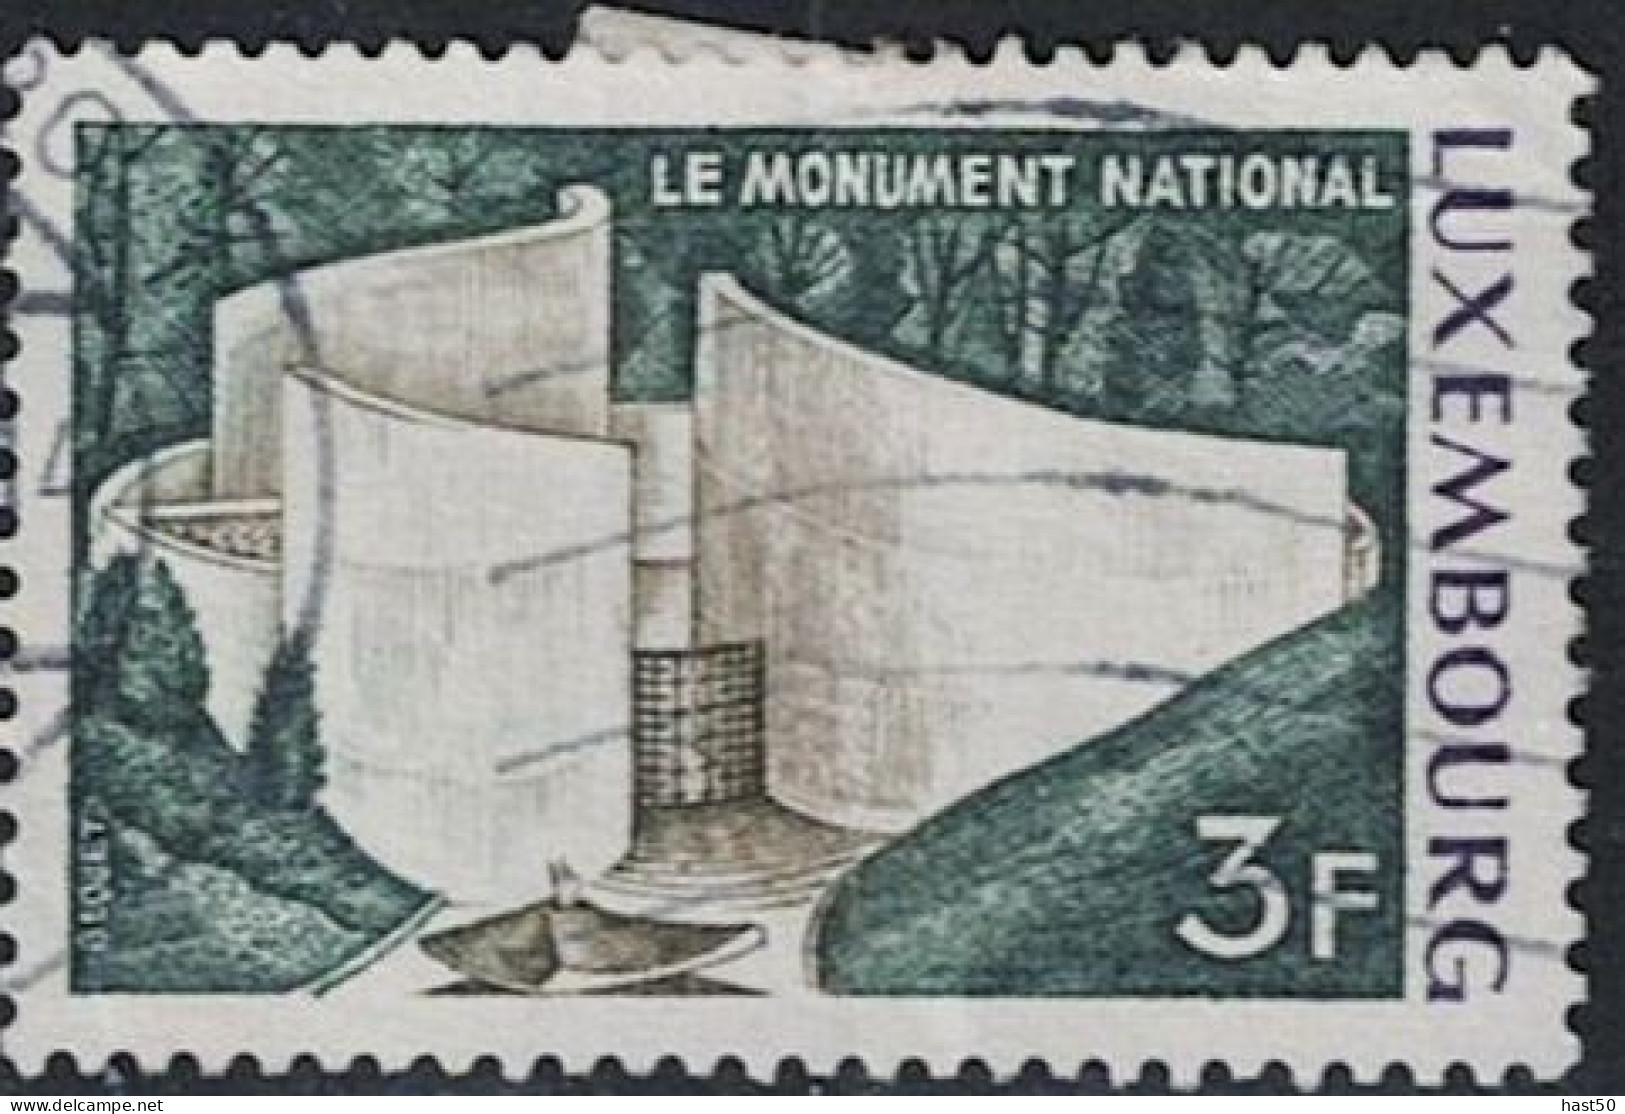 Luxemburg - Nationaldenkmal (MiNr: 850) 1972 - Gest Used Obl - Used Stamps